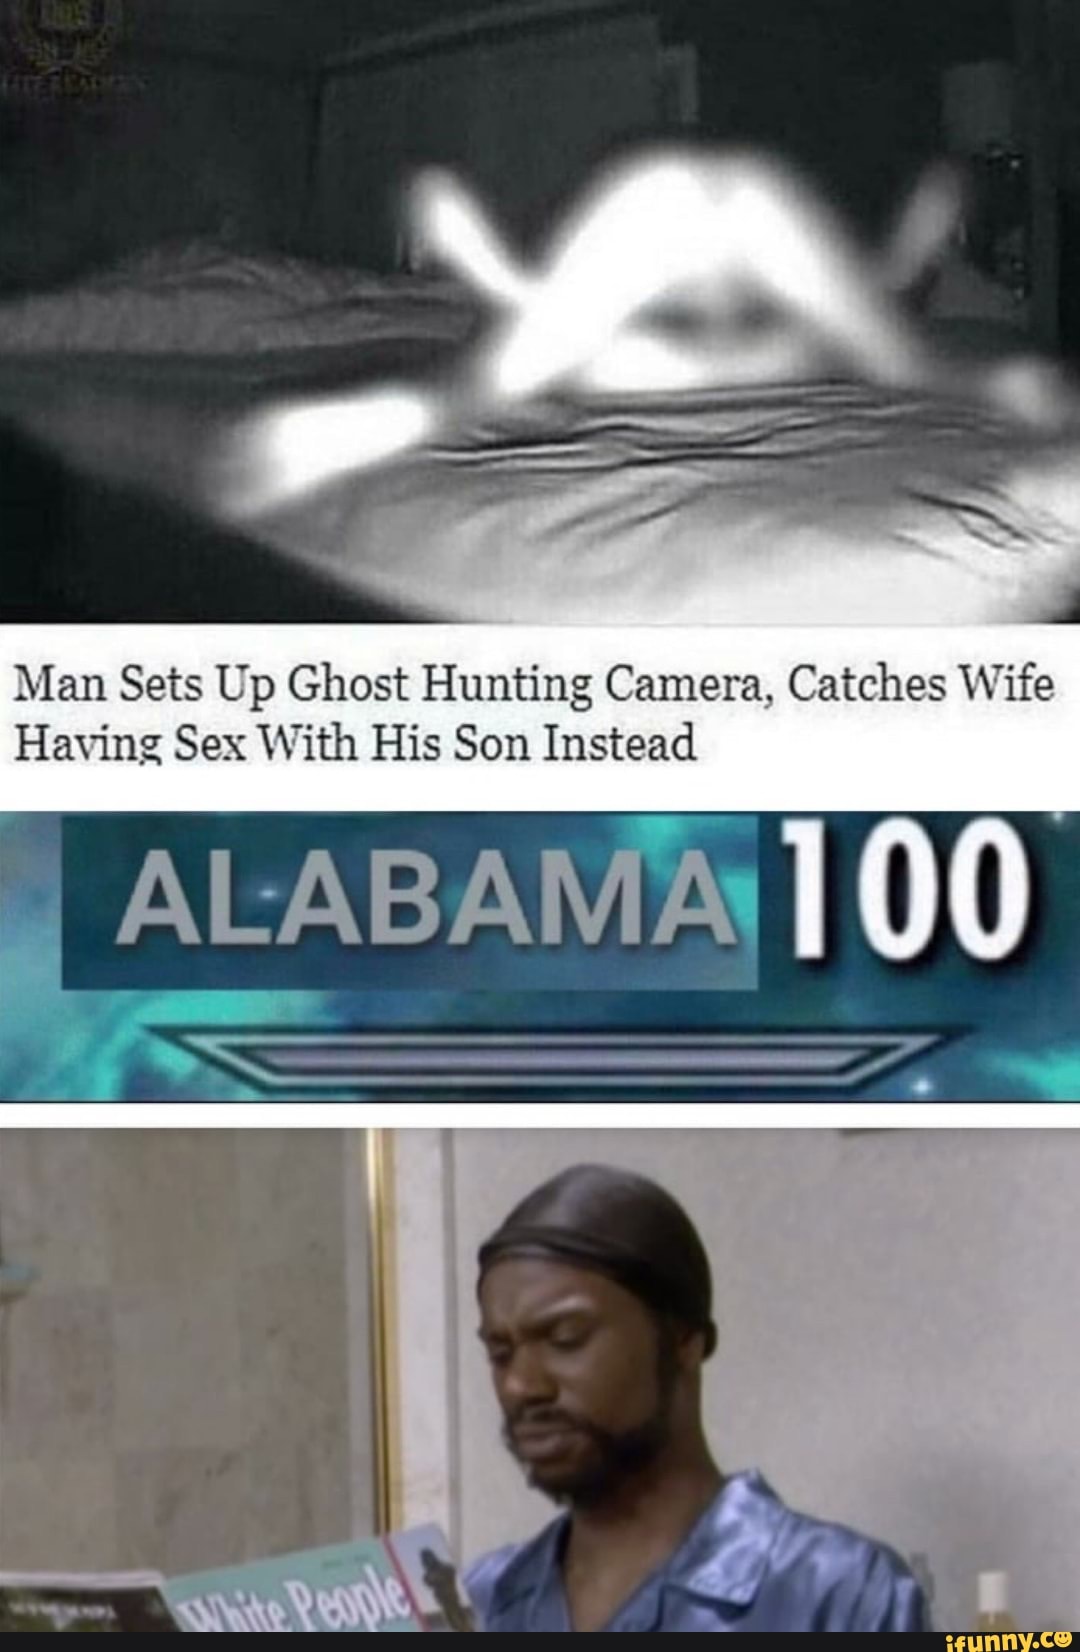 Man Sets Up Ghost Hunting Camera, Catches Wife Having Sex With His Son Instead 0) ALABAMAN